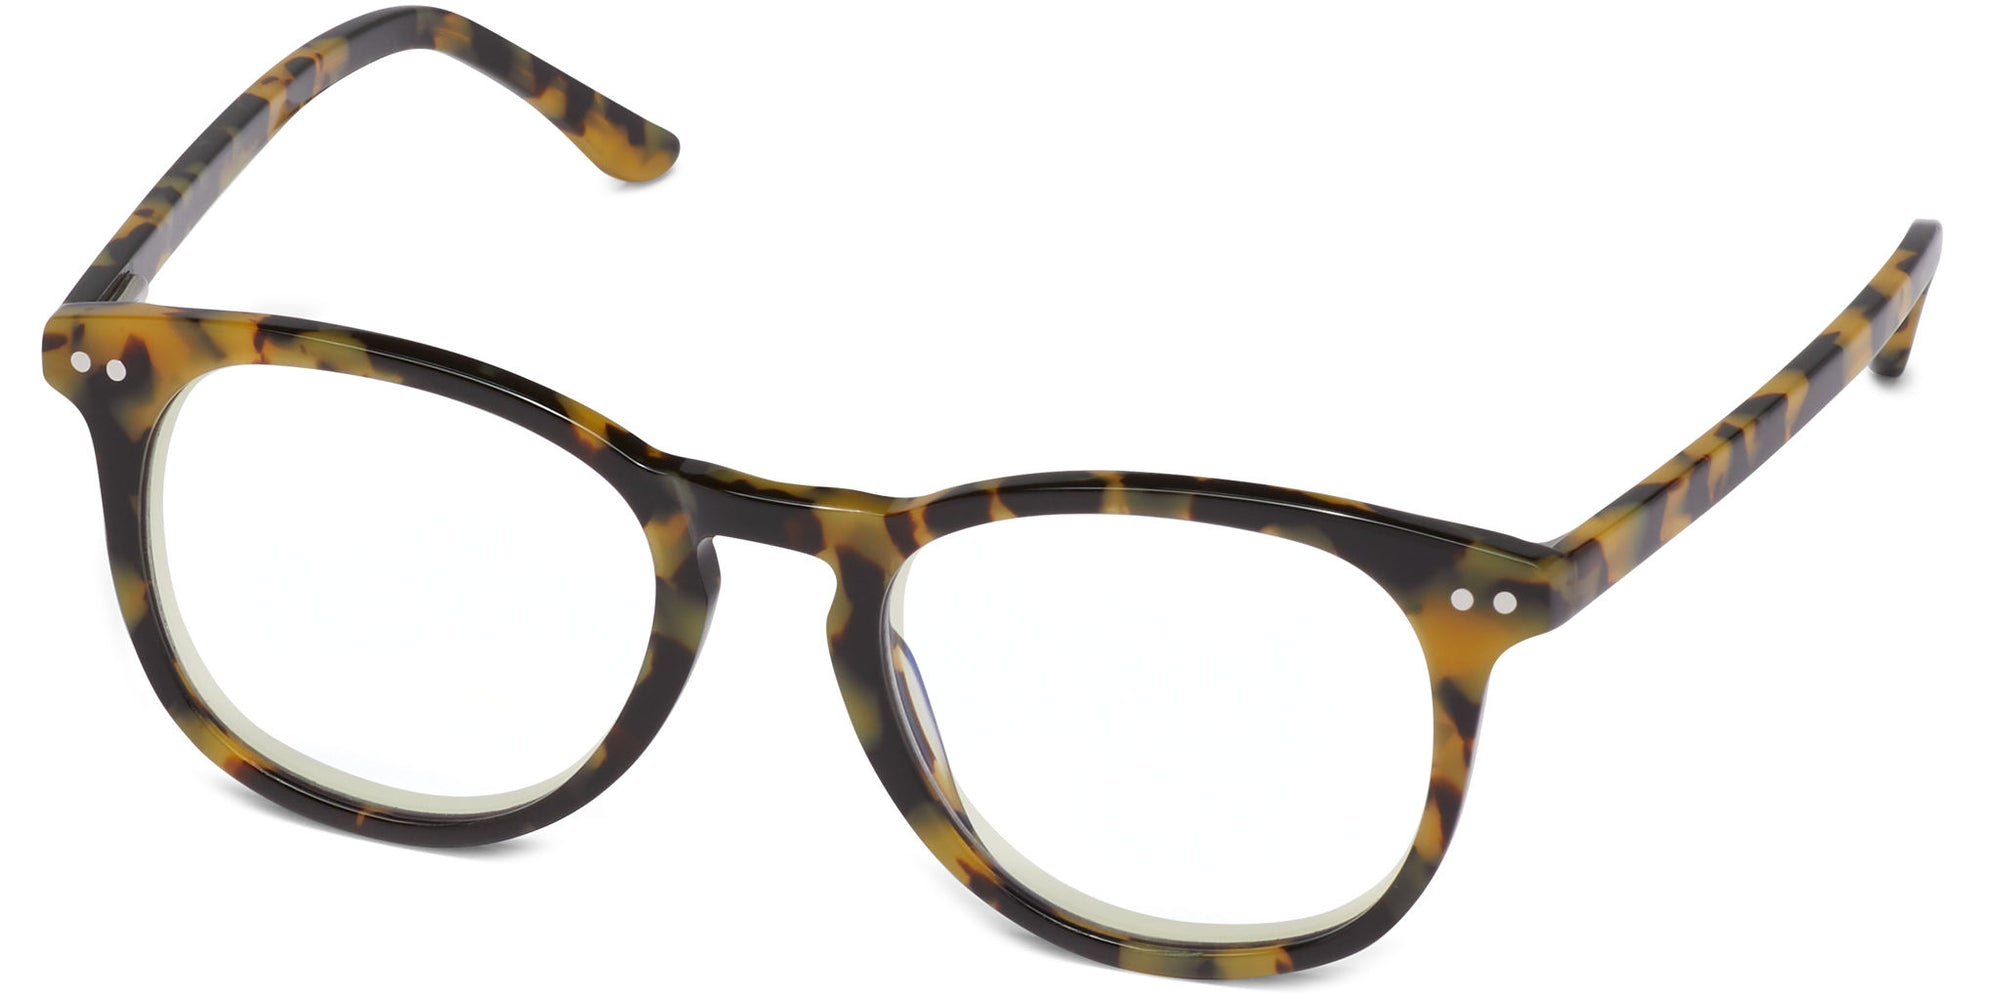 Signature Collection Readers - Brooke - Tortoise / 1.25 - Blue Light Filtering Readers